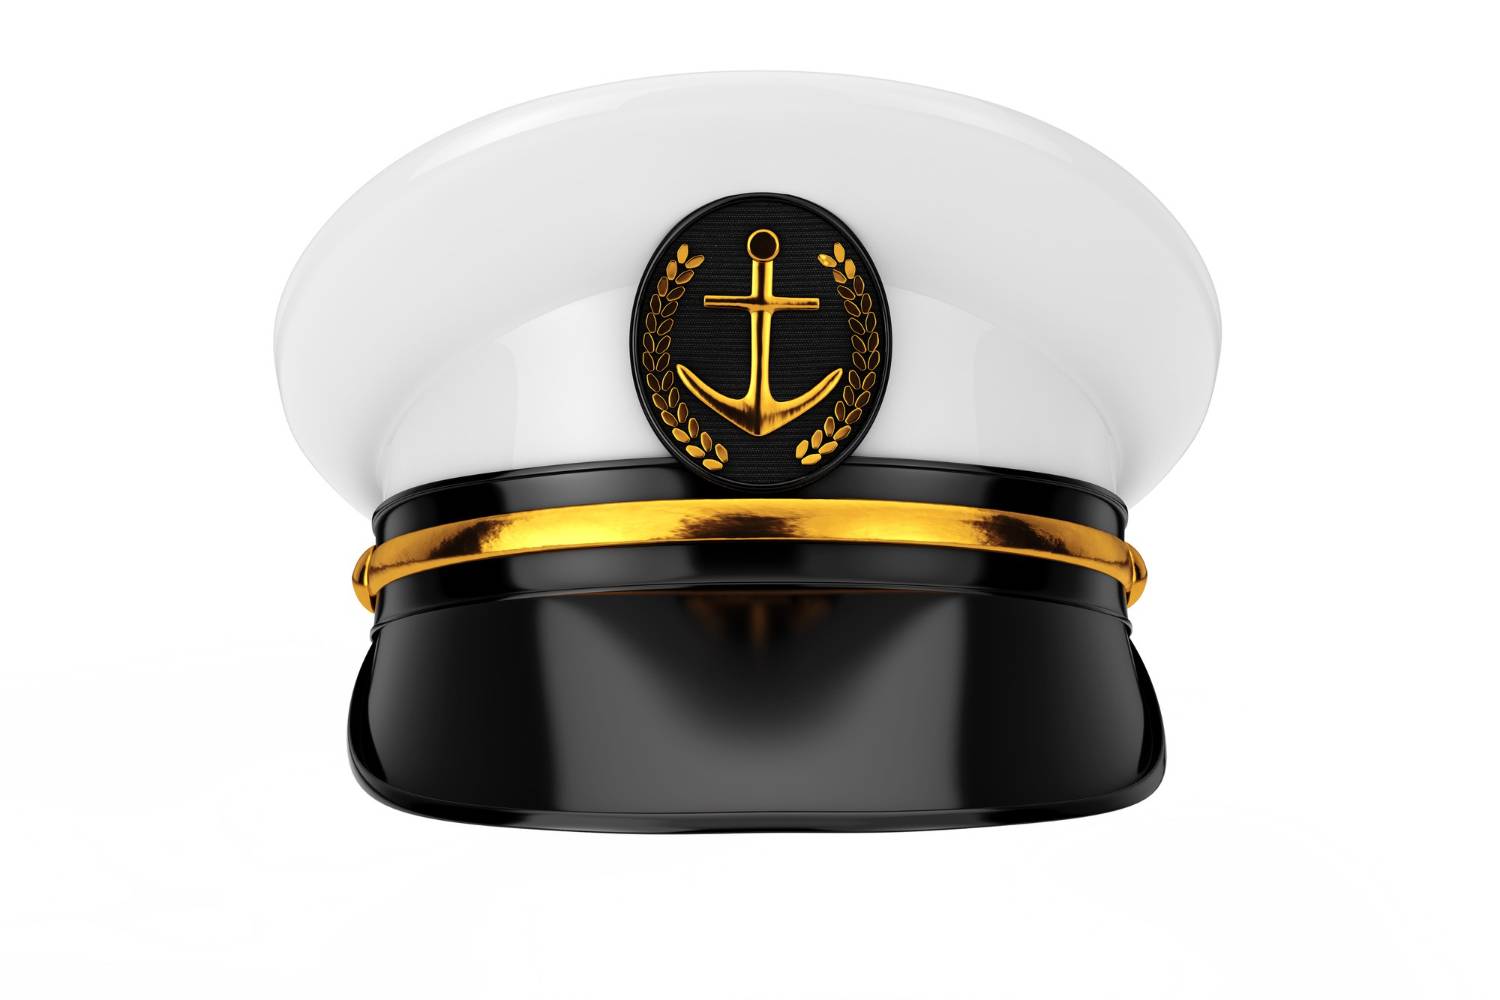 "A captain's hat with a shiny black brim and a golden anchor emblem, symbolizing nautical authority."